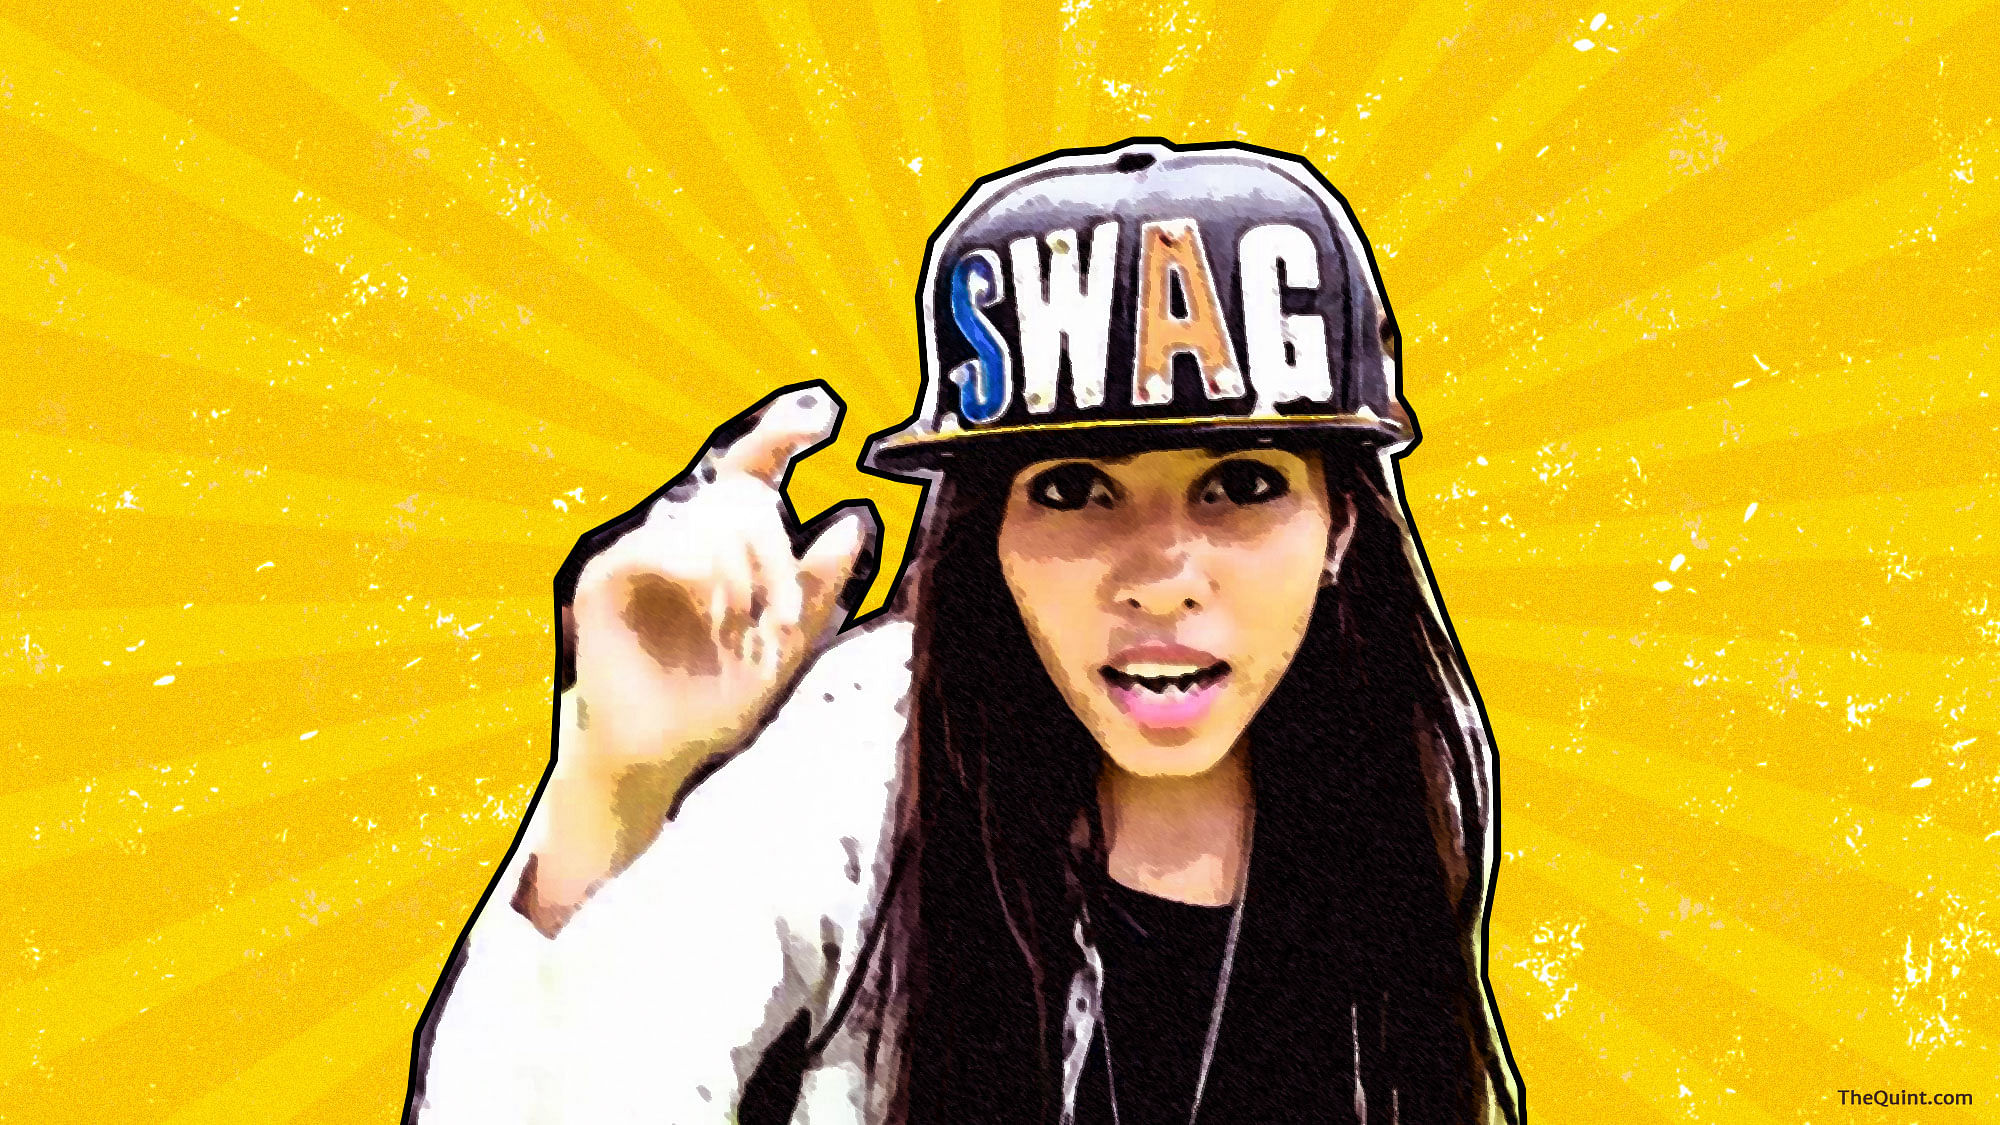 A dive into Dhinchak Pooja’s online presence reveals a feisty girl, loyal fans and sassy subversion of the male gaze. (Photo: Liju Joseph/<b>The Quint)</b>